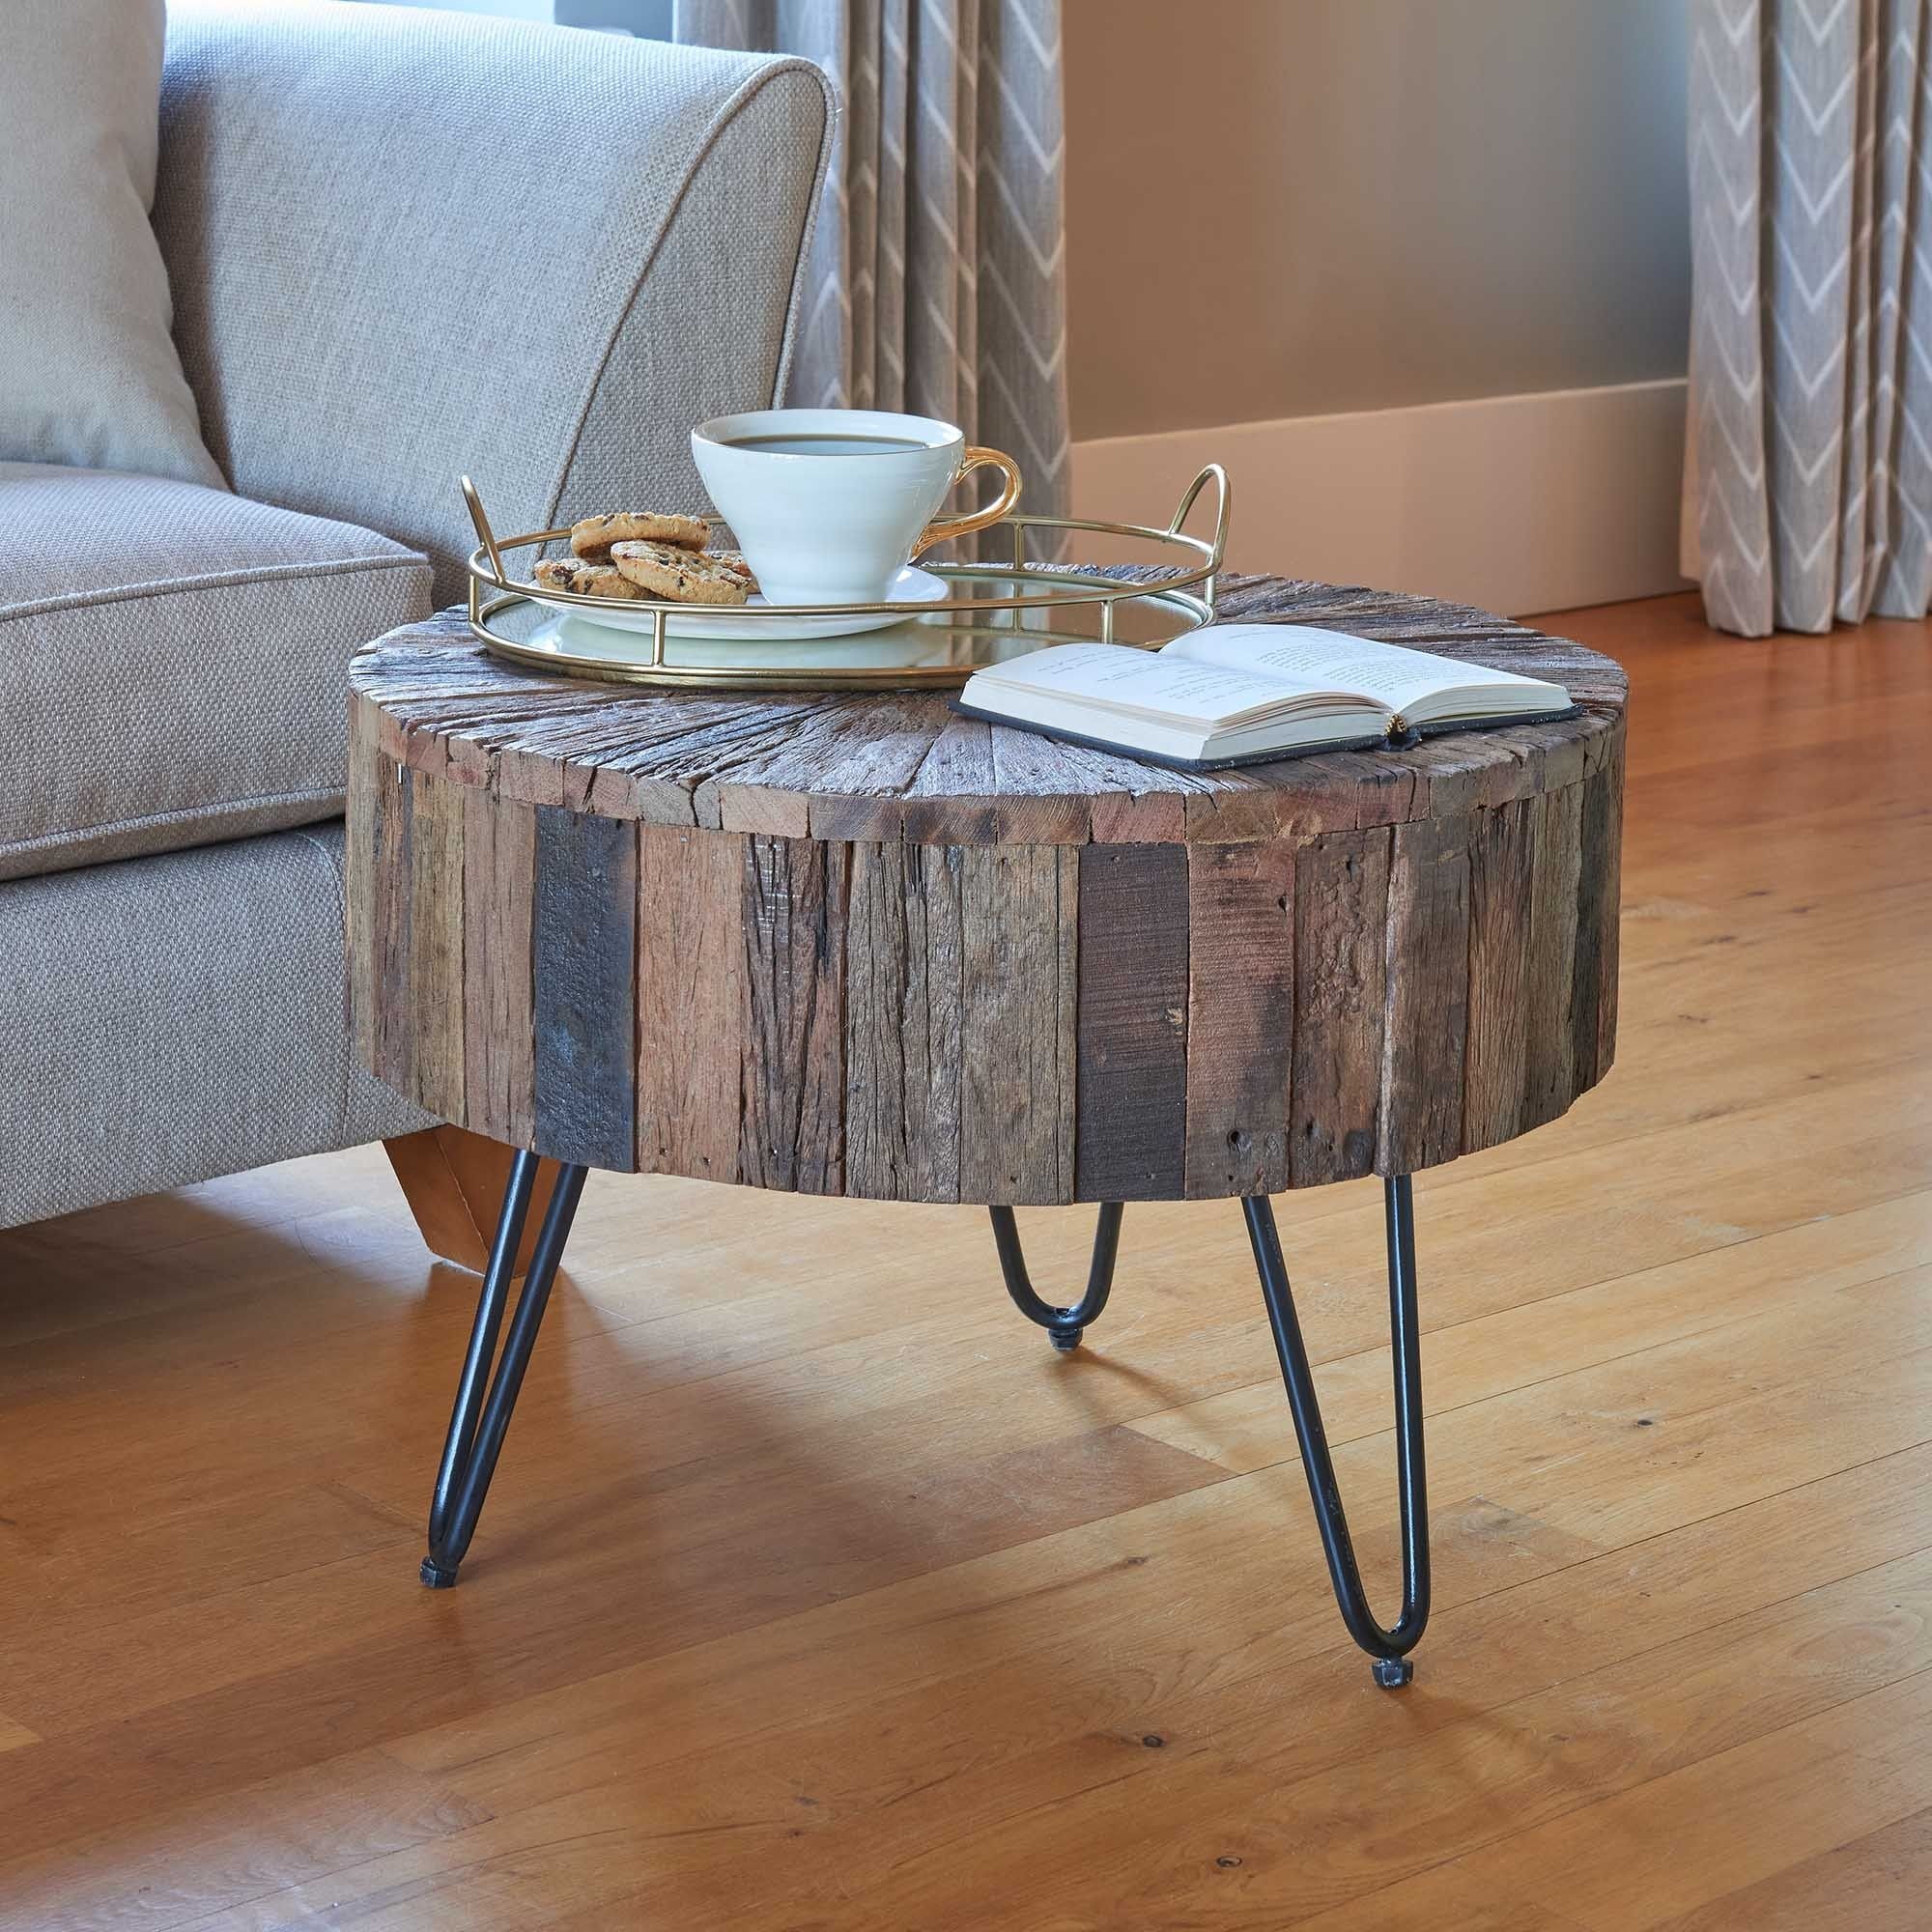 Round Mango Wood Coffee Table | Lounge | Wood Coffee Tables In Coffee Tables With Round Wooden Tops (Gallery 12 of 20)